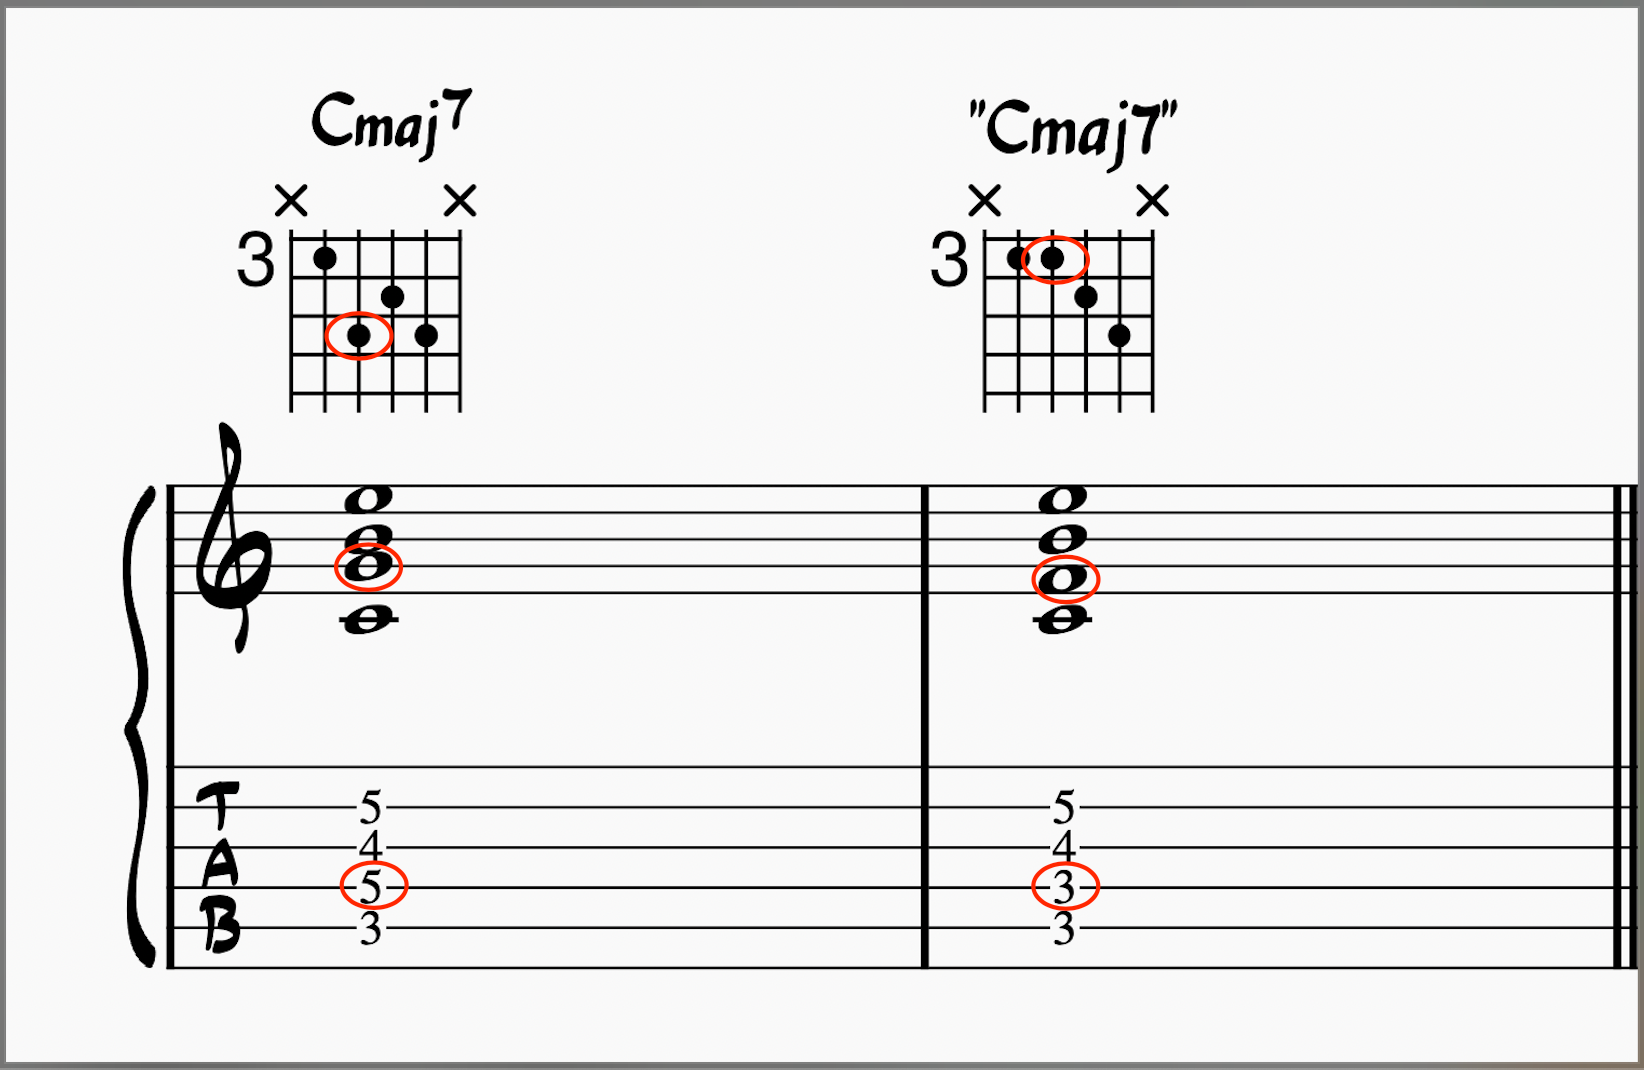 Comparing a Cmaj7 voicing on guitar to its quartal chord equivalent 